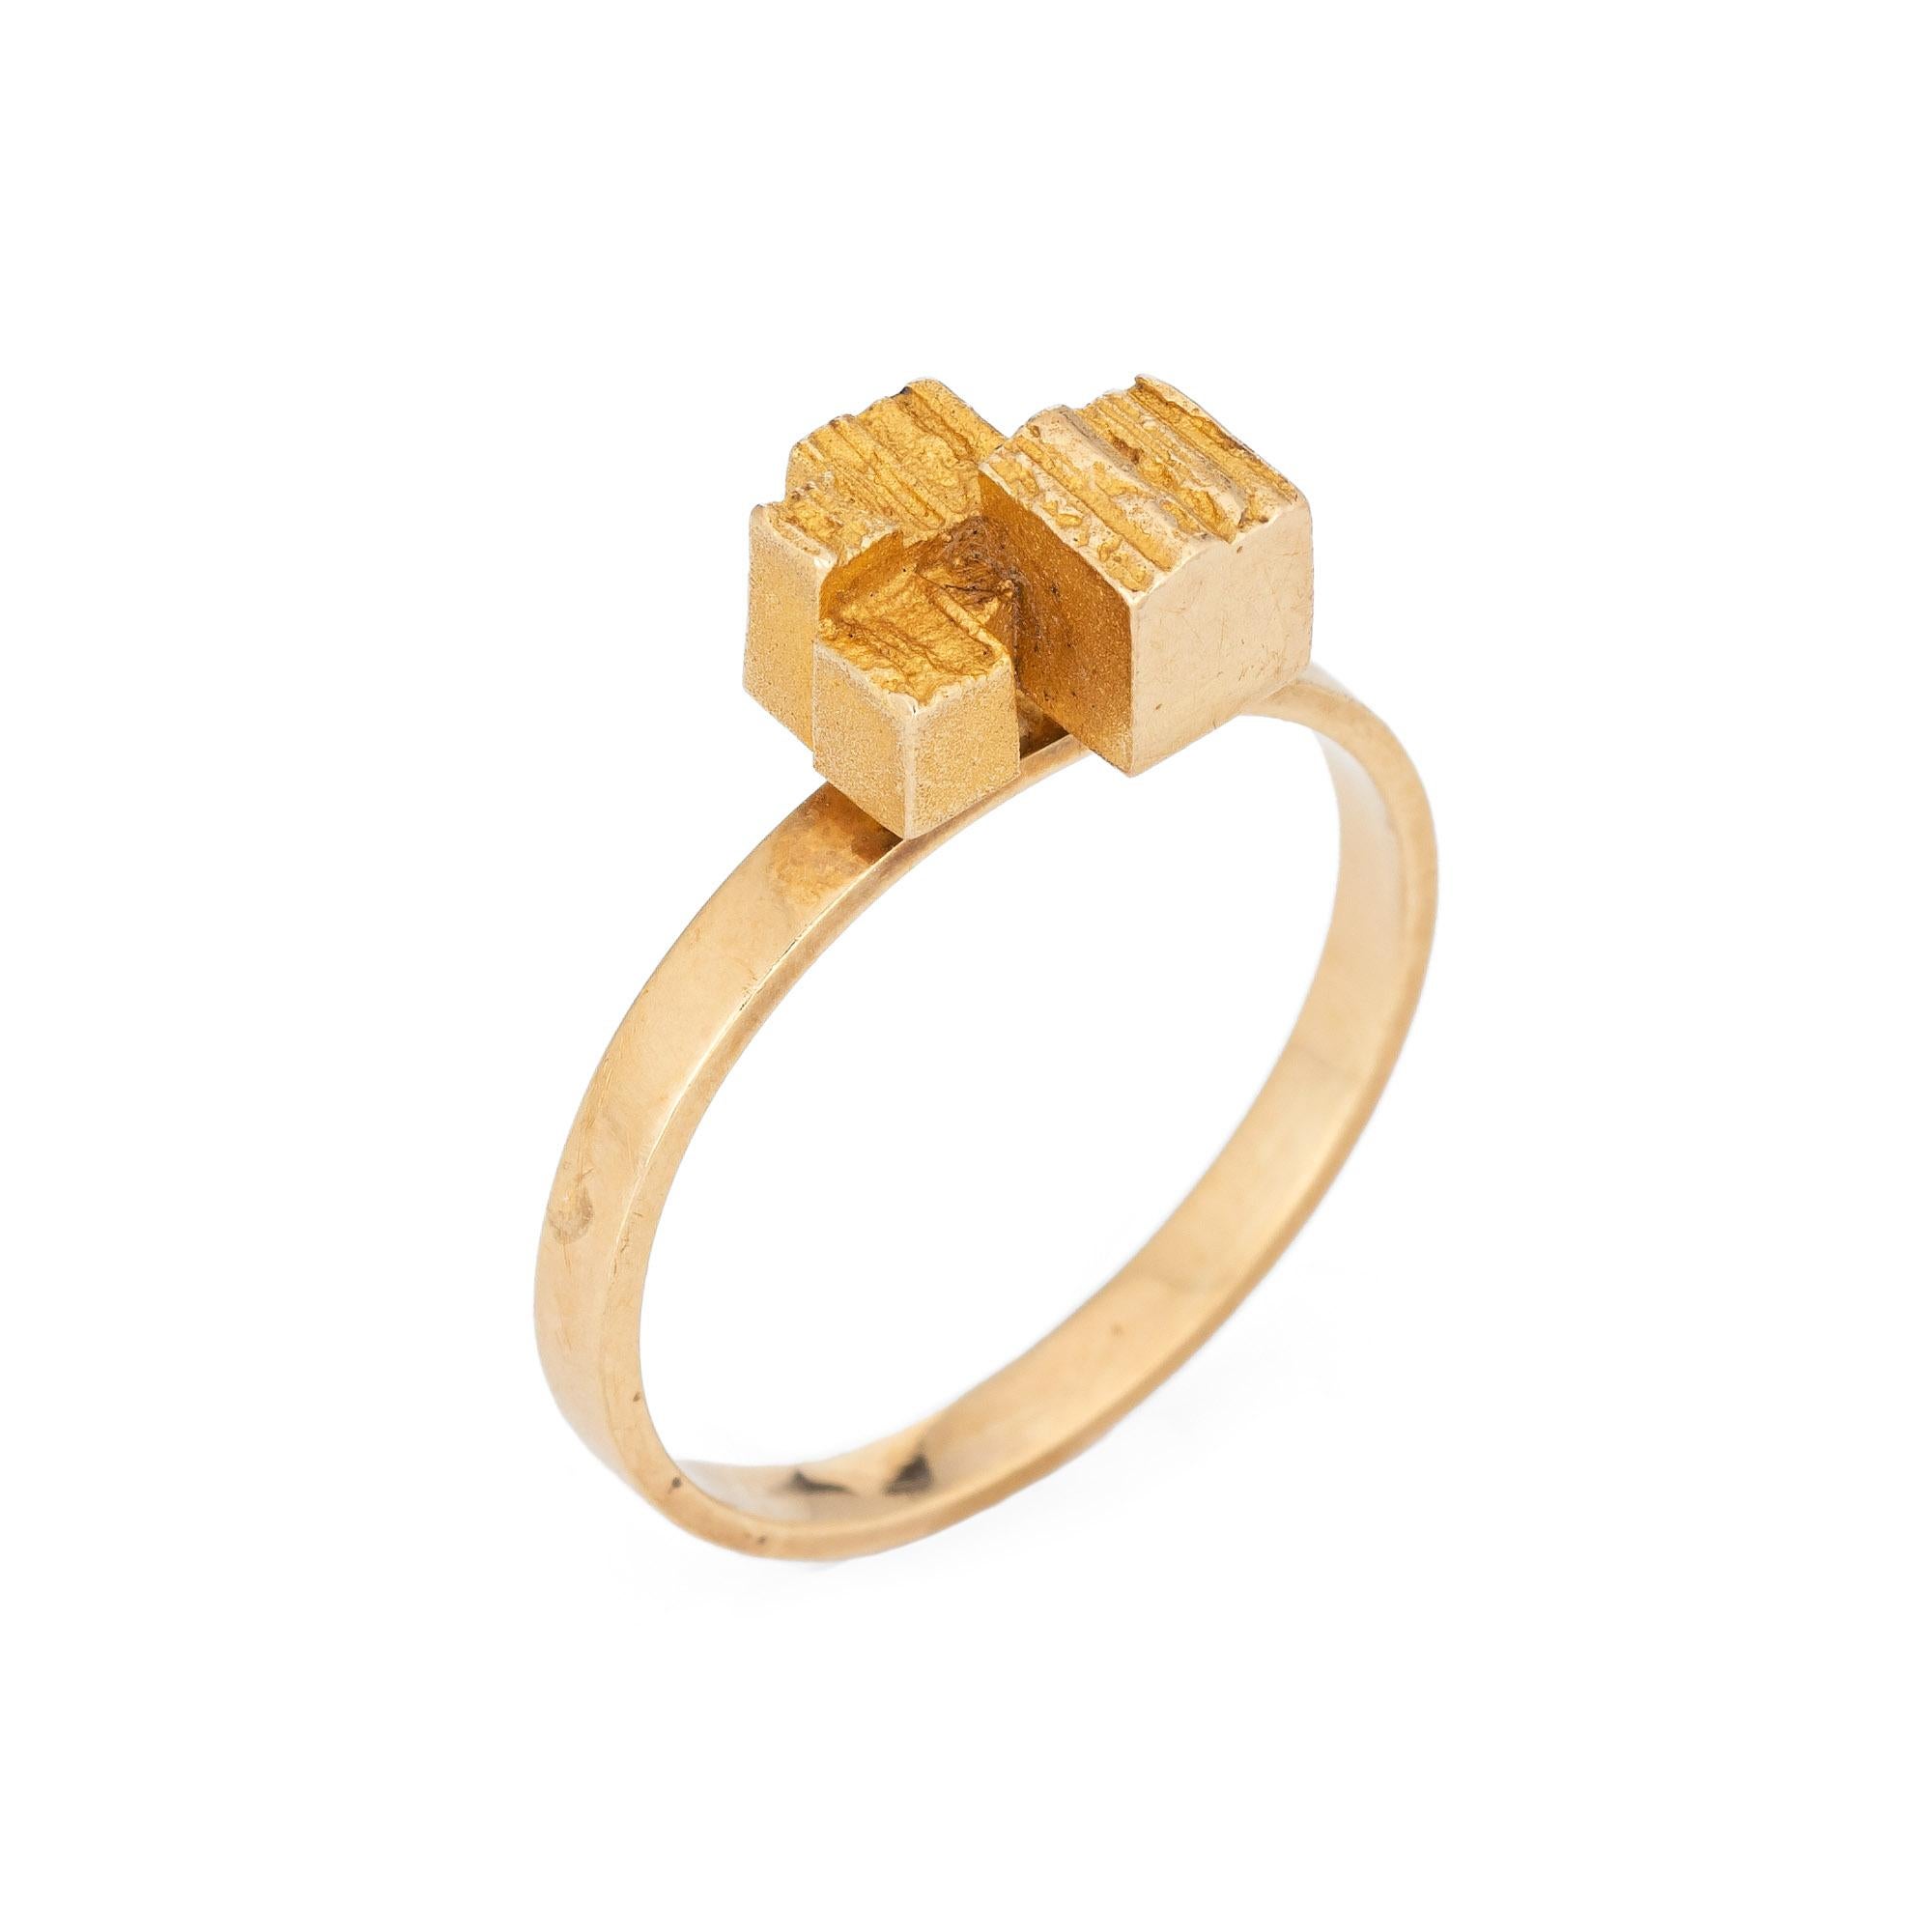 Stylish vintage Lapponia ring (circa 1960s) crafted in 18 karat yellow gold. 

Founded in the 1960s, Lapponia was developed by visionary Pekka Anttila and gifted artist & designer Björn Weckström. With a rough matte surface, the cube design is a